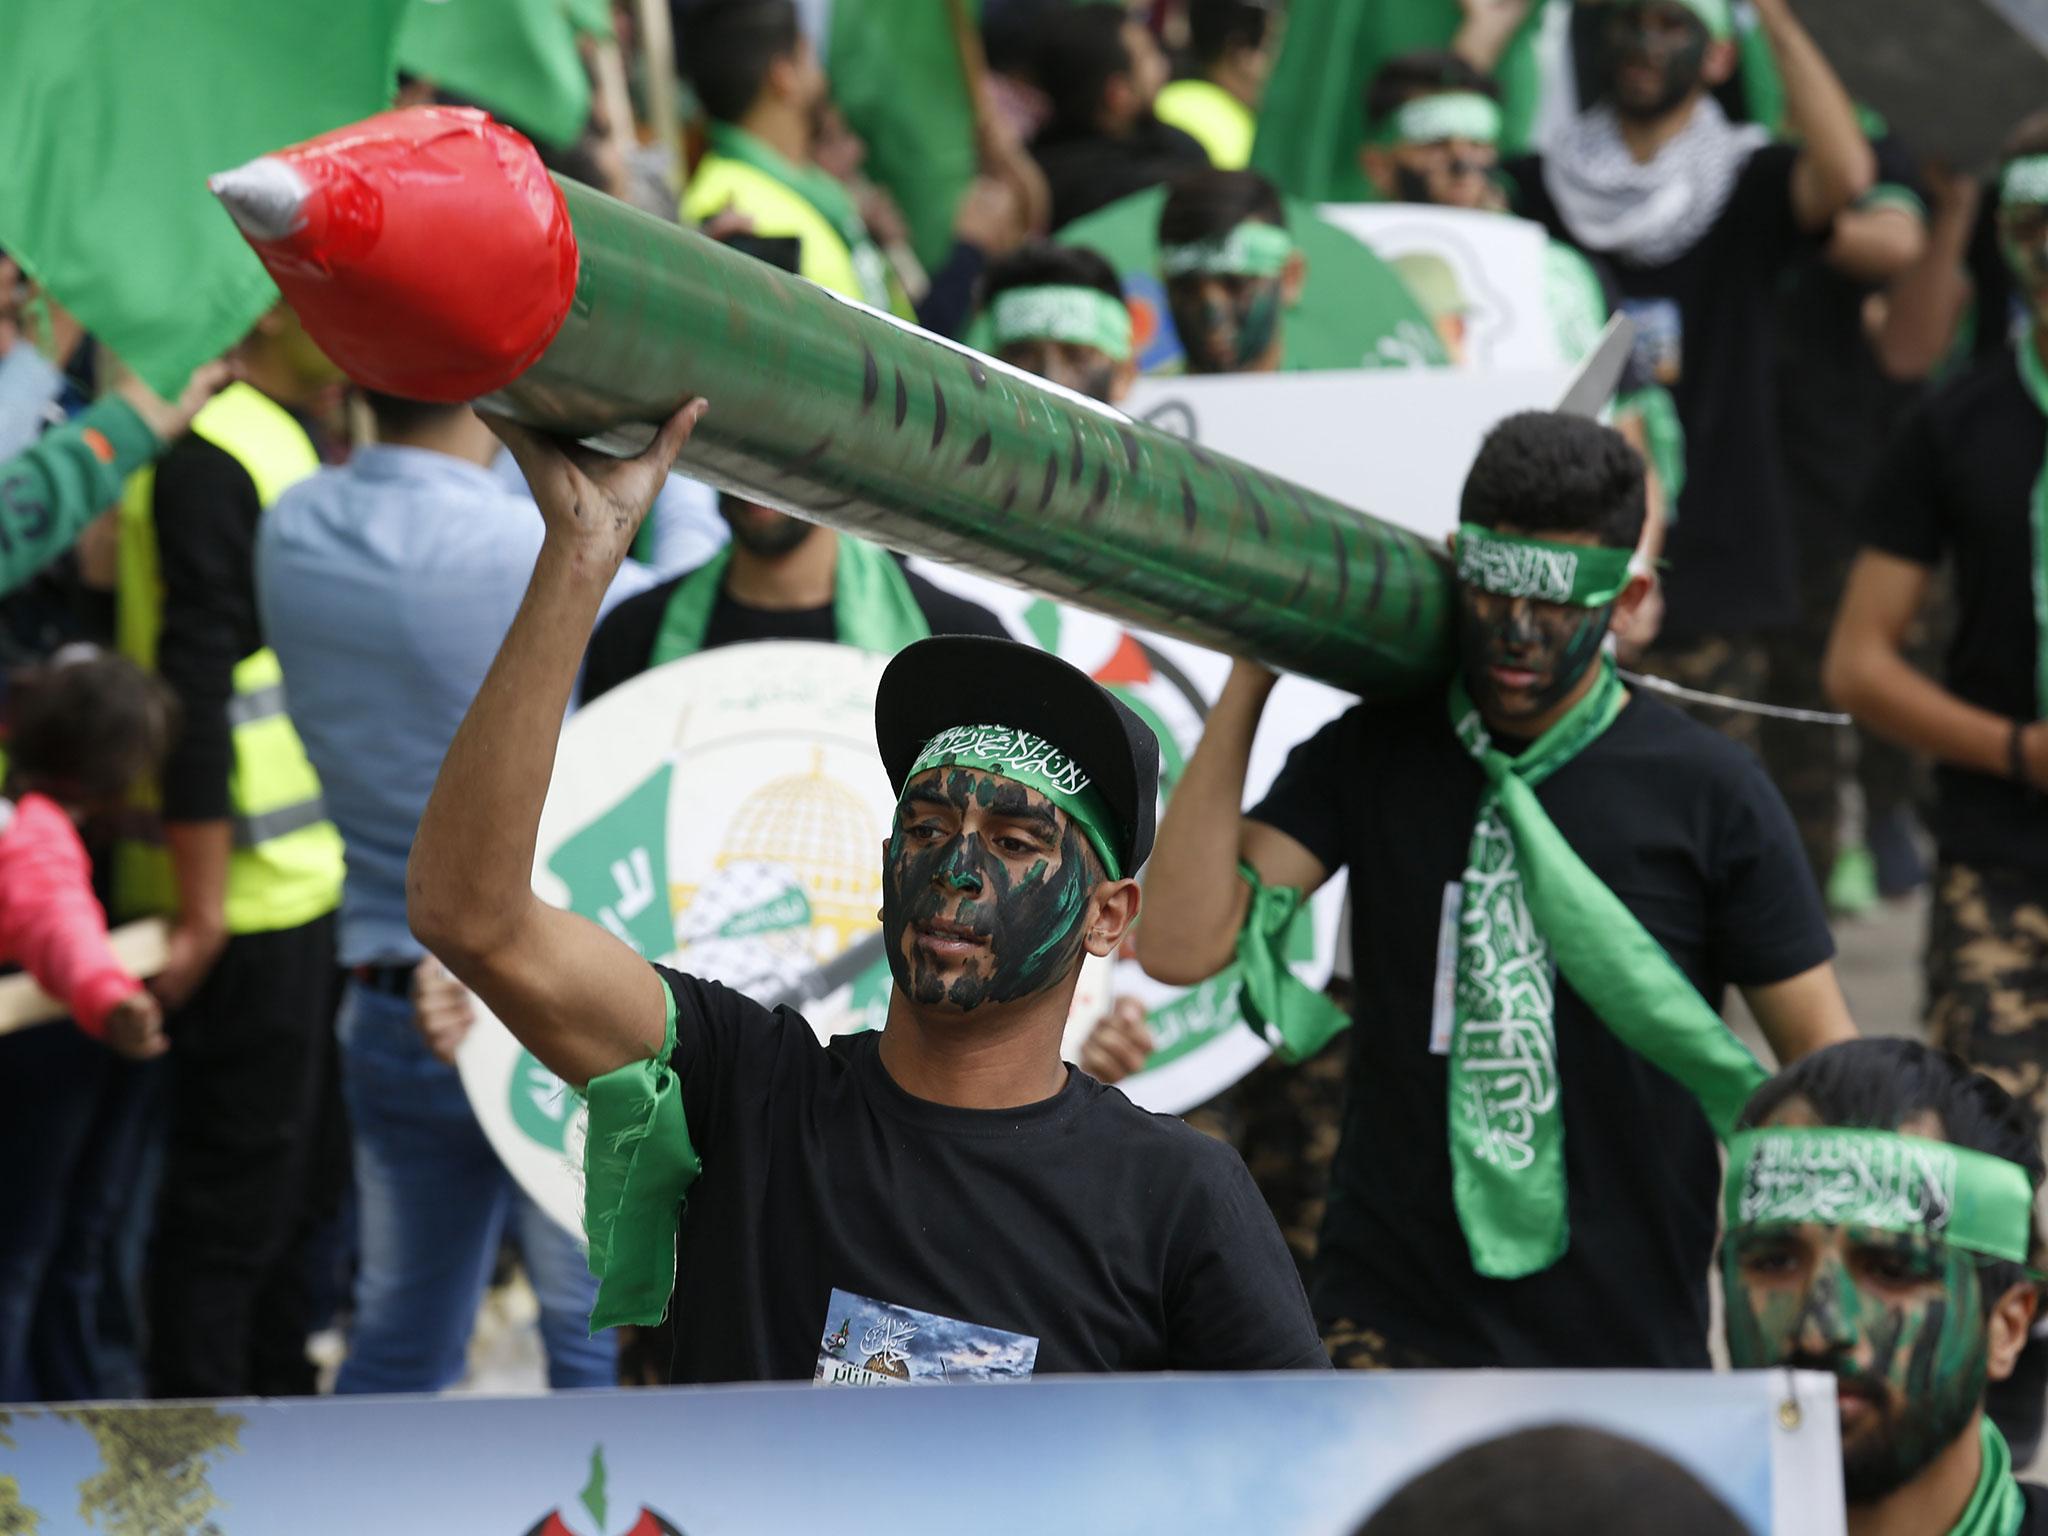 Palestinian Hamas supporters carry a model of a missile during a rally marking the 30th anniversary of Hamas movement, in the West Bank City of Nablus